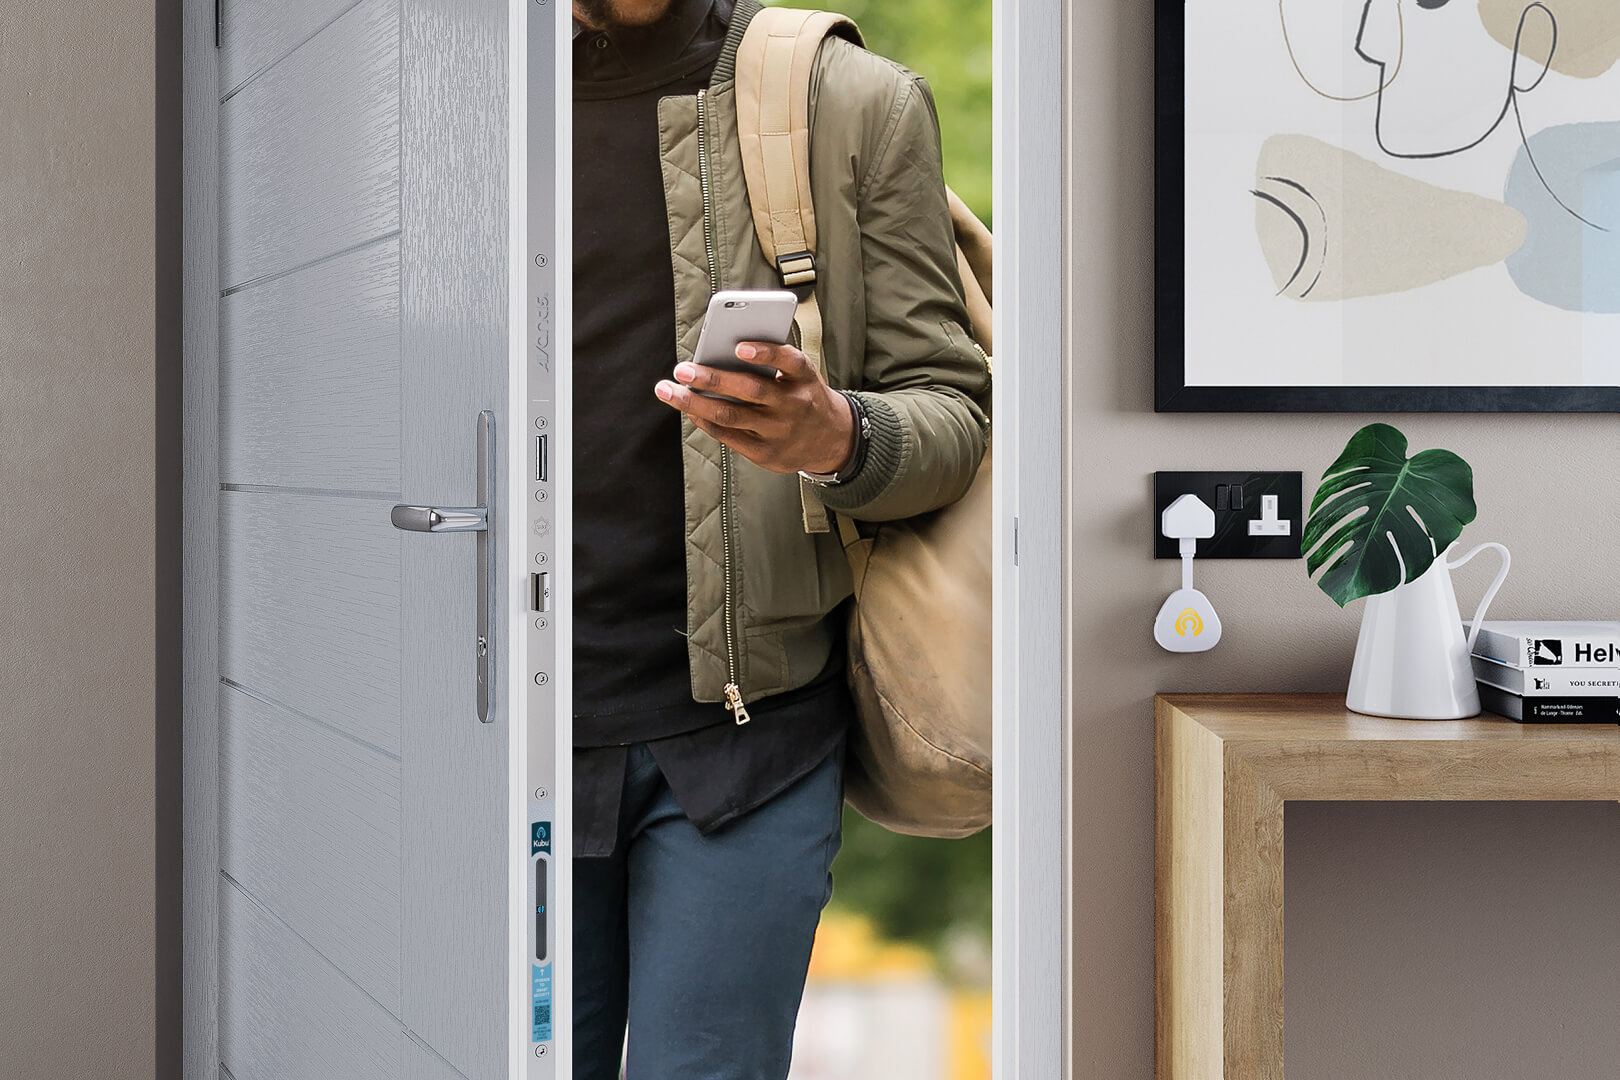 A man coming through a front door holding a smart phone